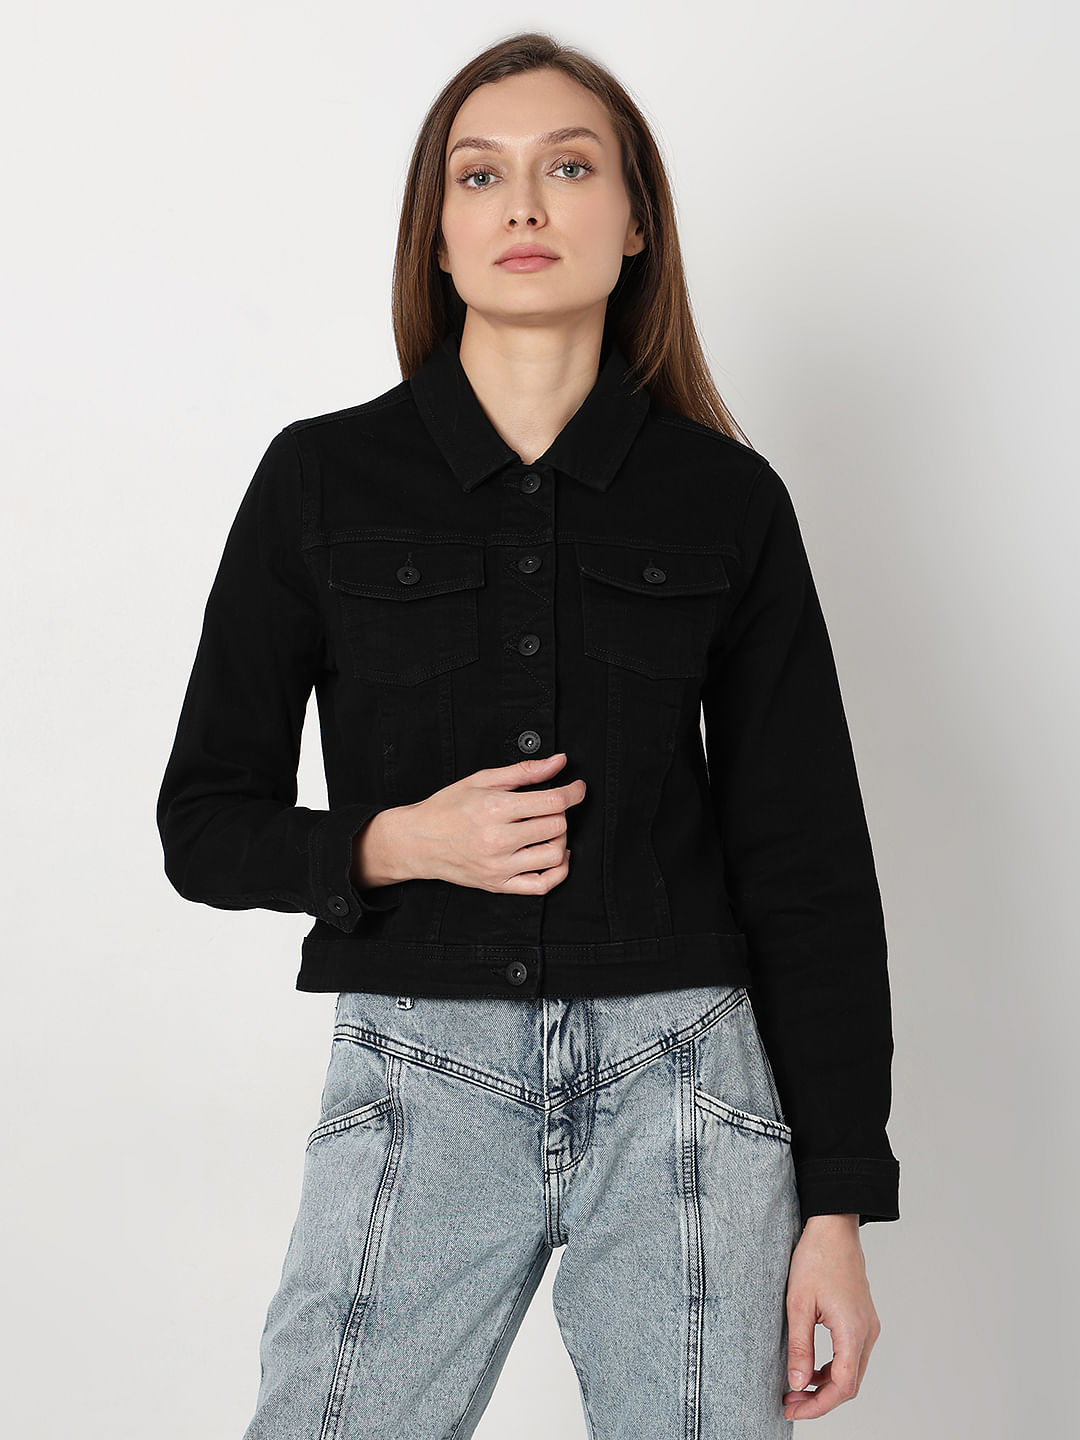 Small Women's Denim Jacket at Rs 170/piece in Mumbai | ID: 14800553512